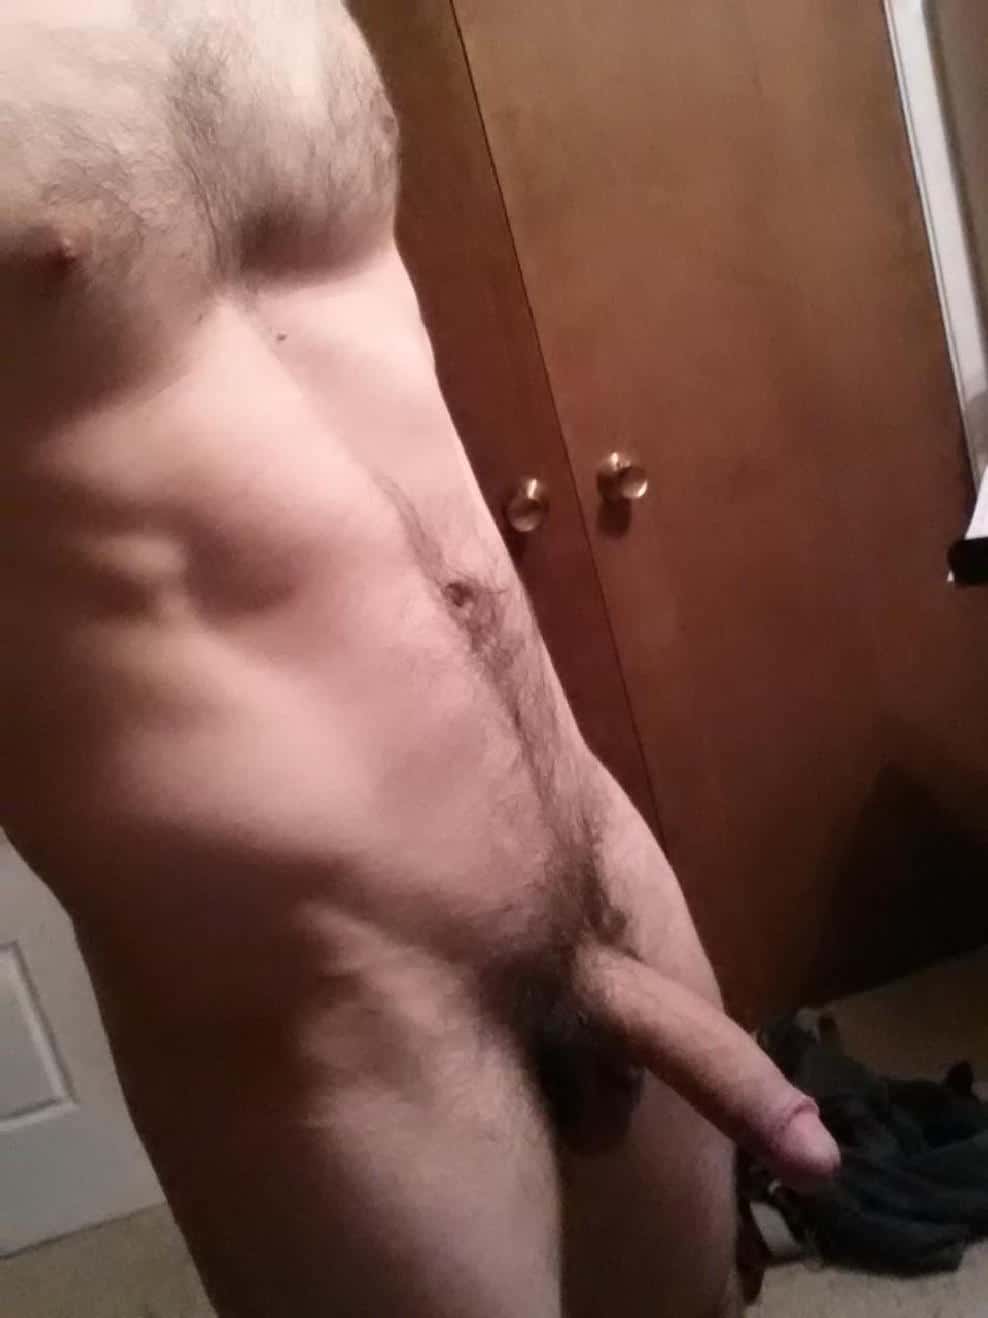 Pic naked guy with hard dick